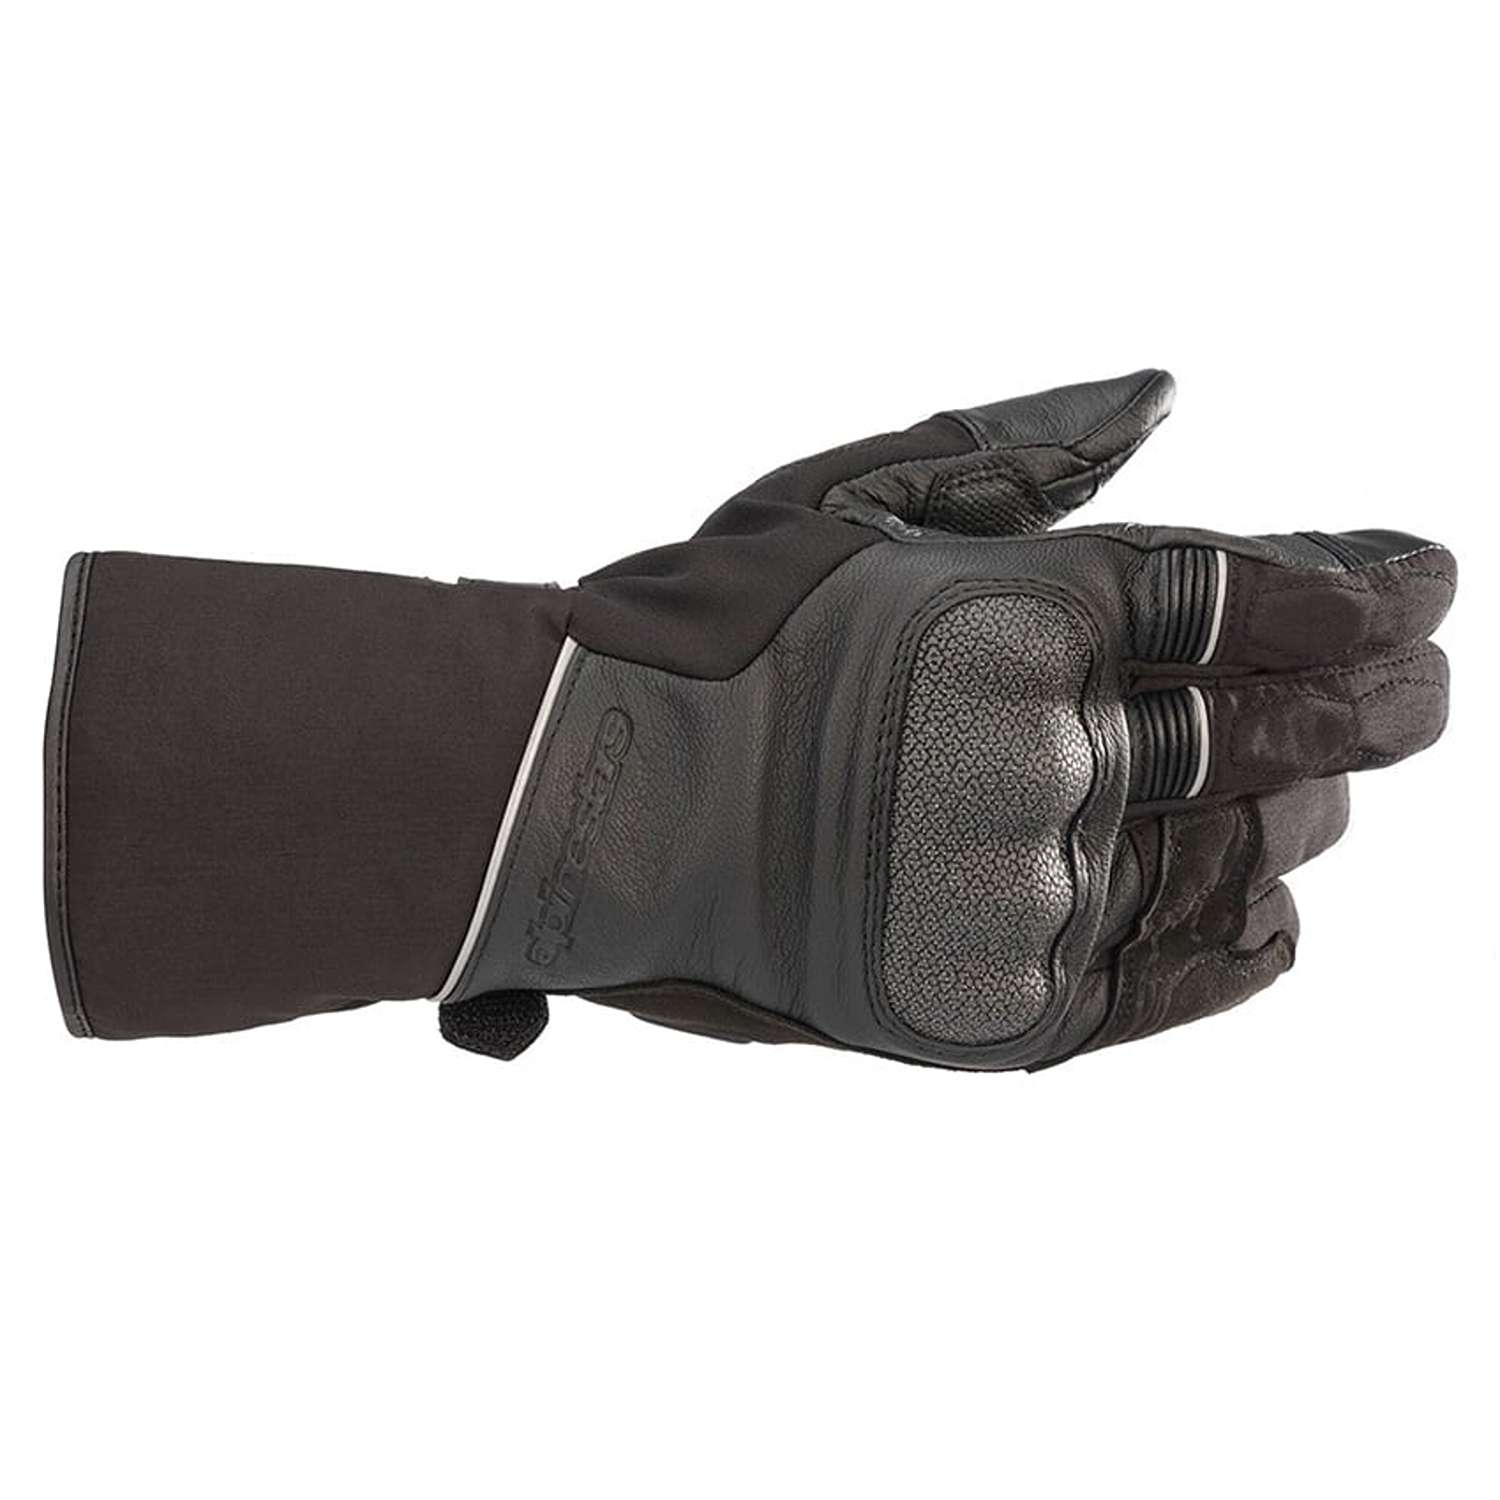 Image of Alpinestars Wr-2 V2 Gore-Tex Gloves With Gore Grip Technology Black Taille L